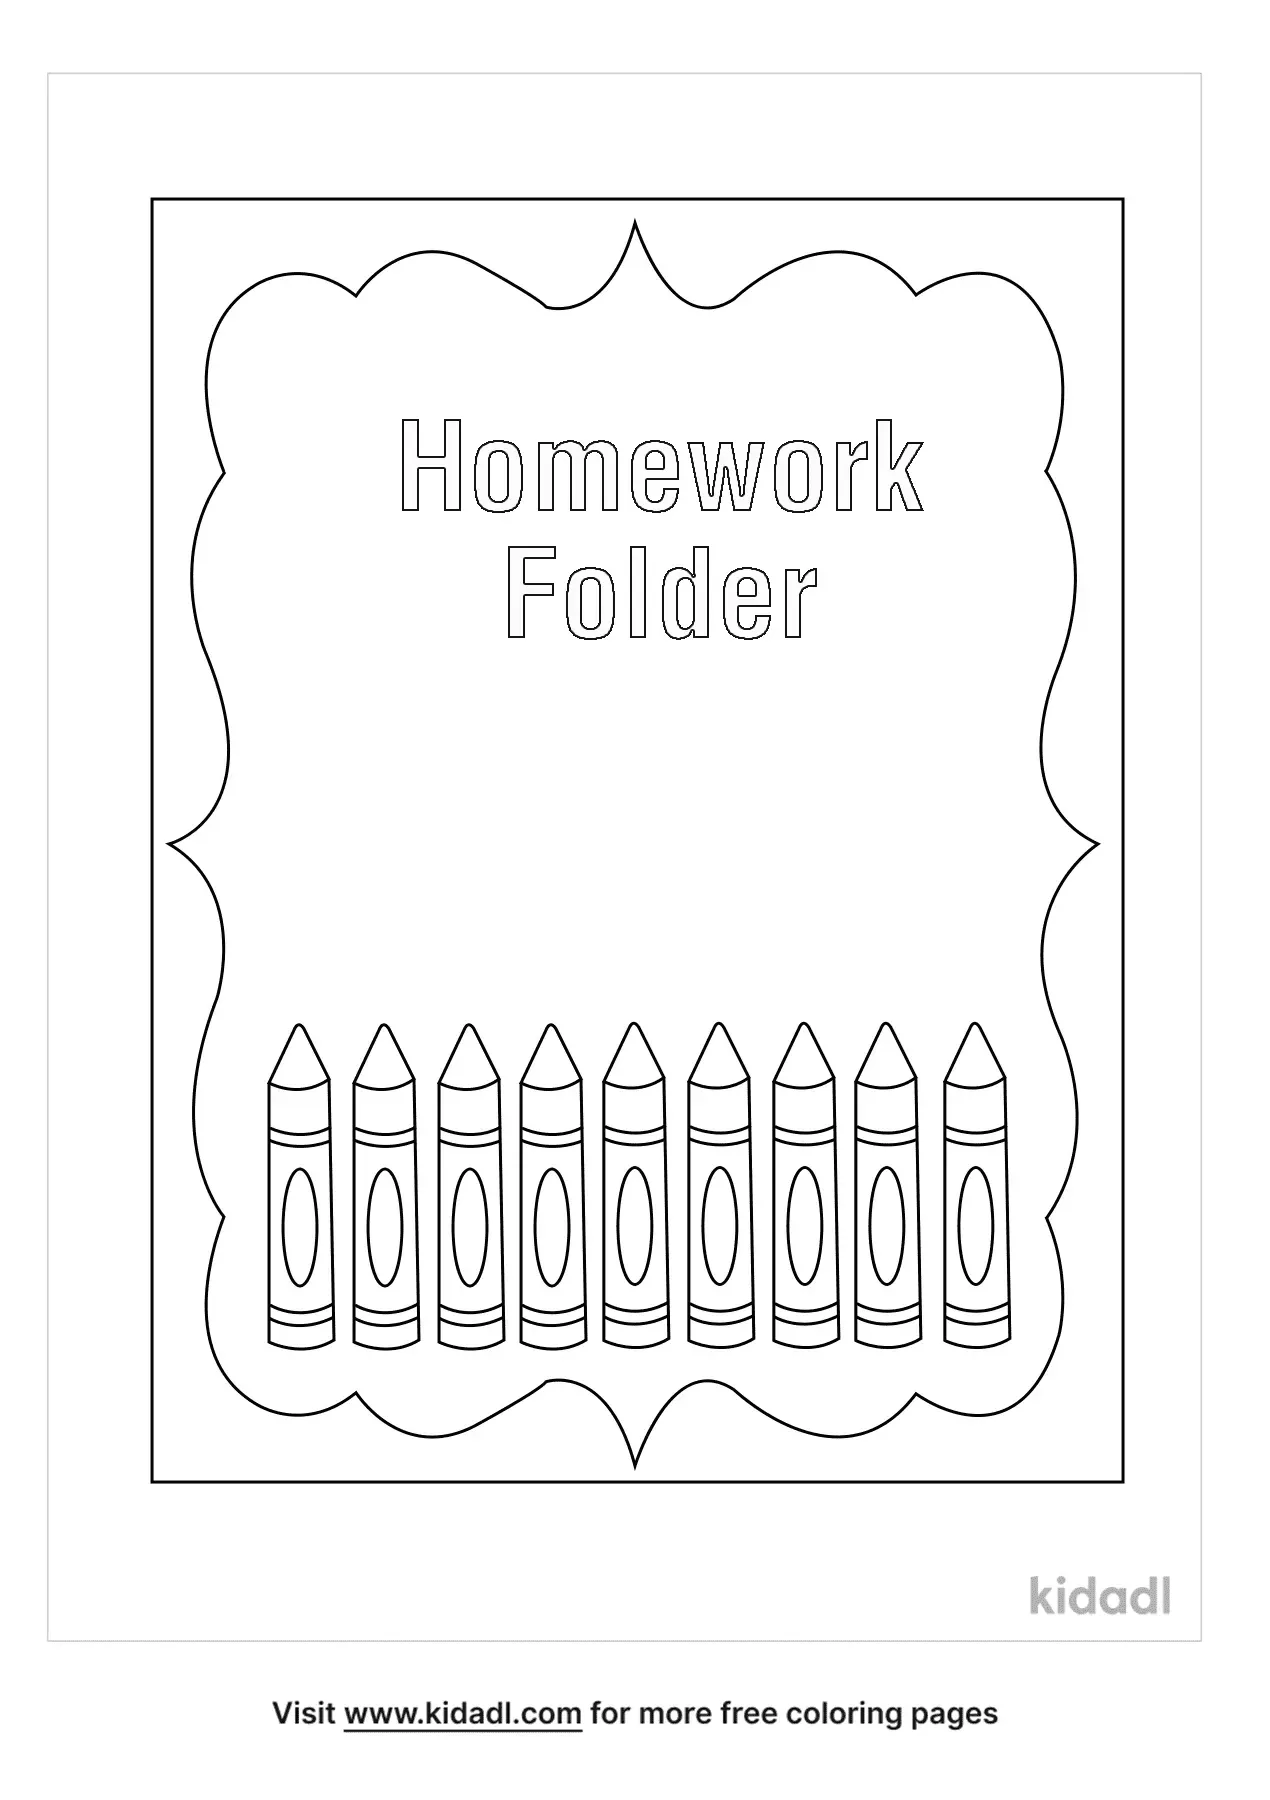 homework folder cover coloring page